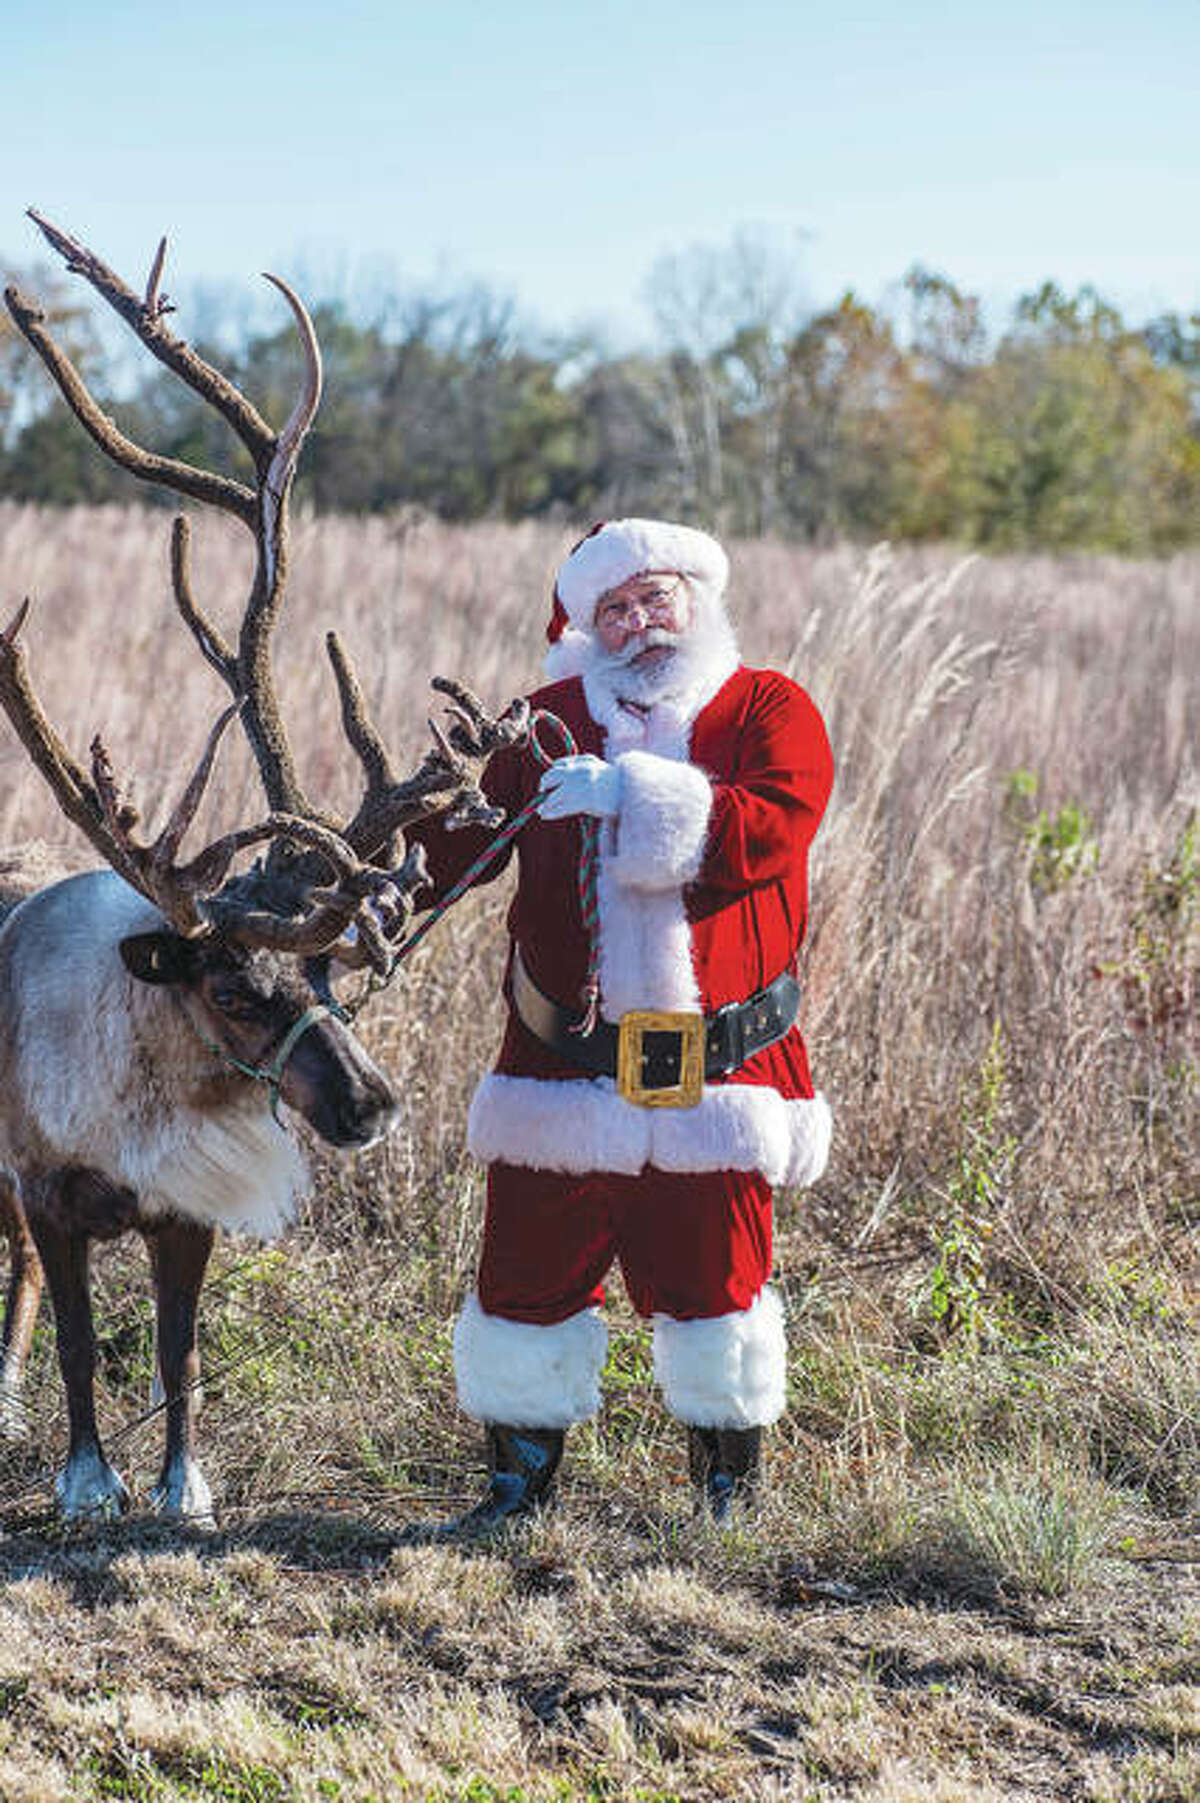 Santa’s “cousin,” Steve Pegram, shares a moment with a reindeer during a holiday photo shoot in Jersey County. Pegram tells children there’s only one Santa, but St. Nick has many cousins.